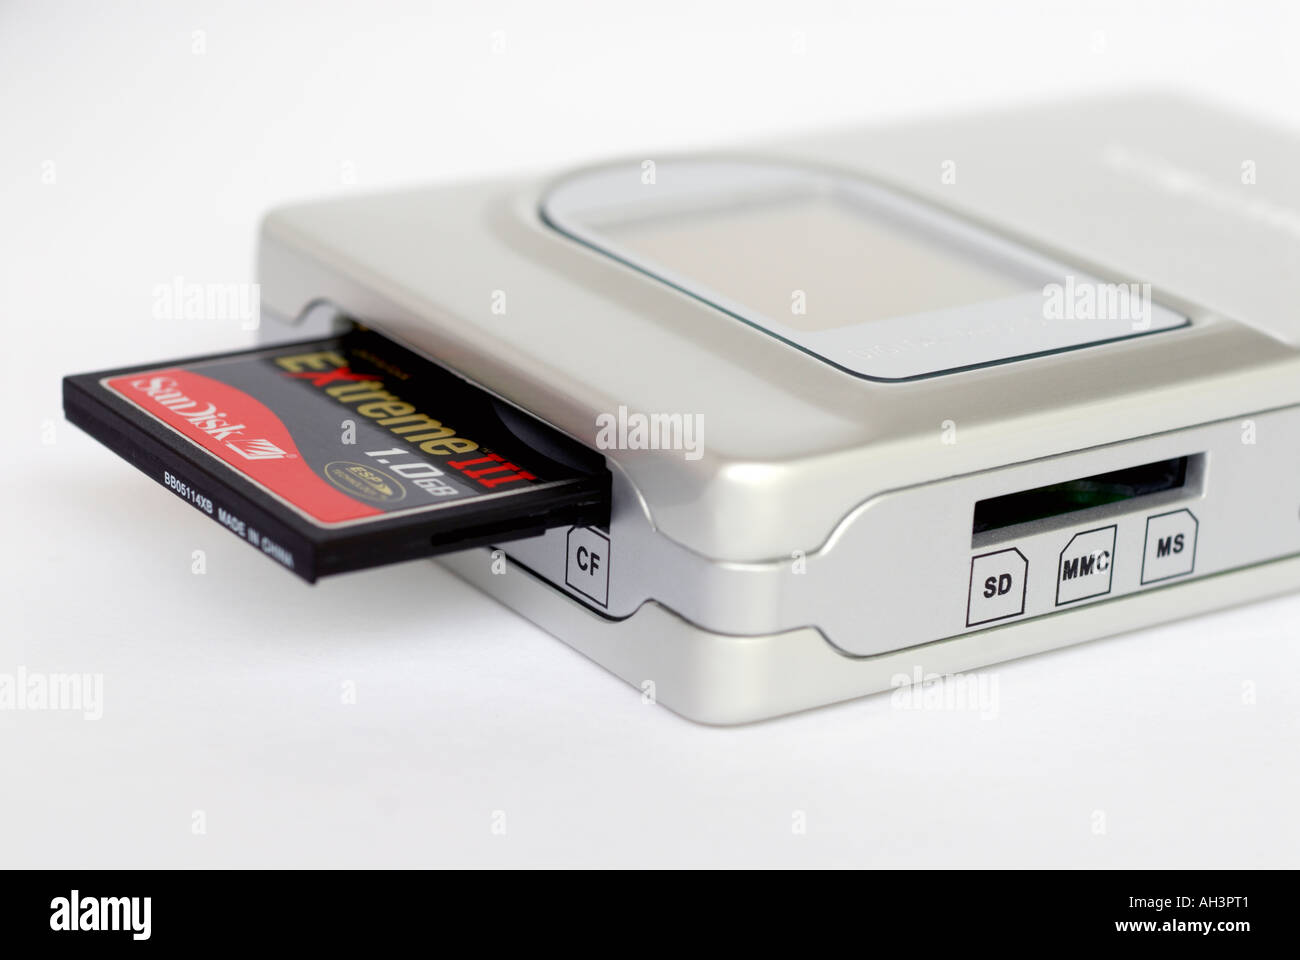 compact card reader for compact flash